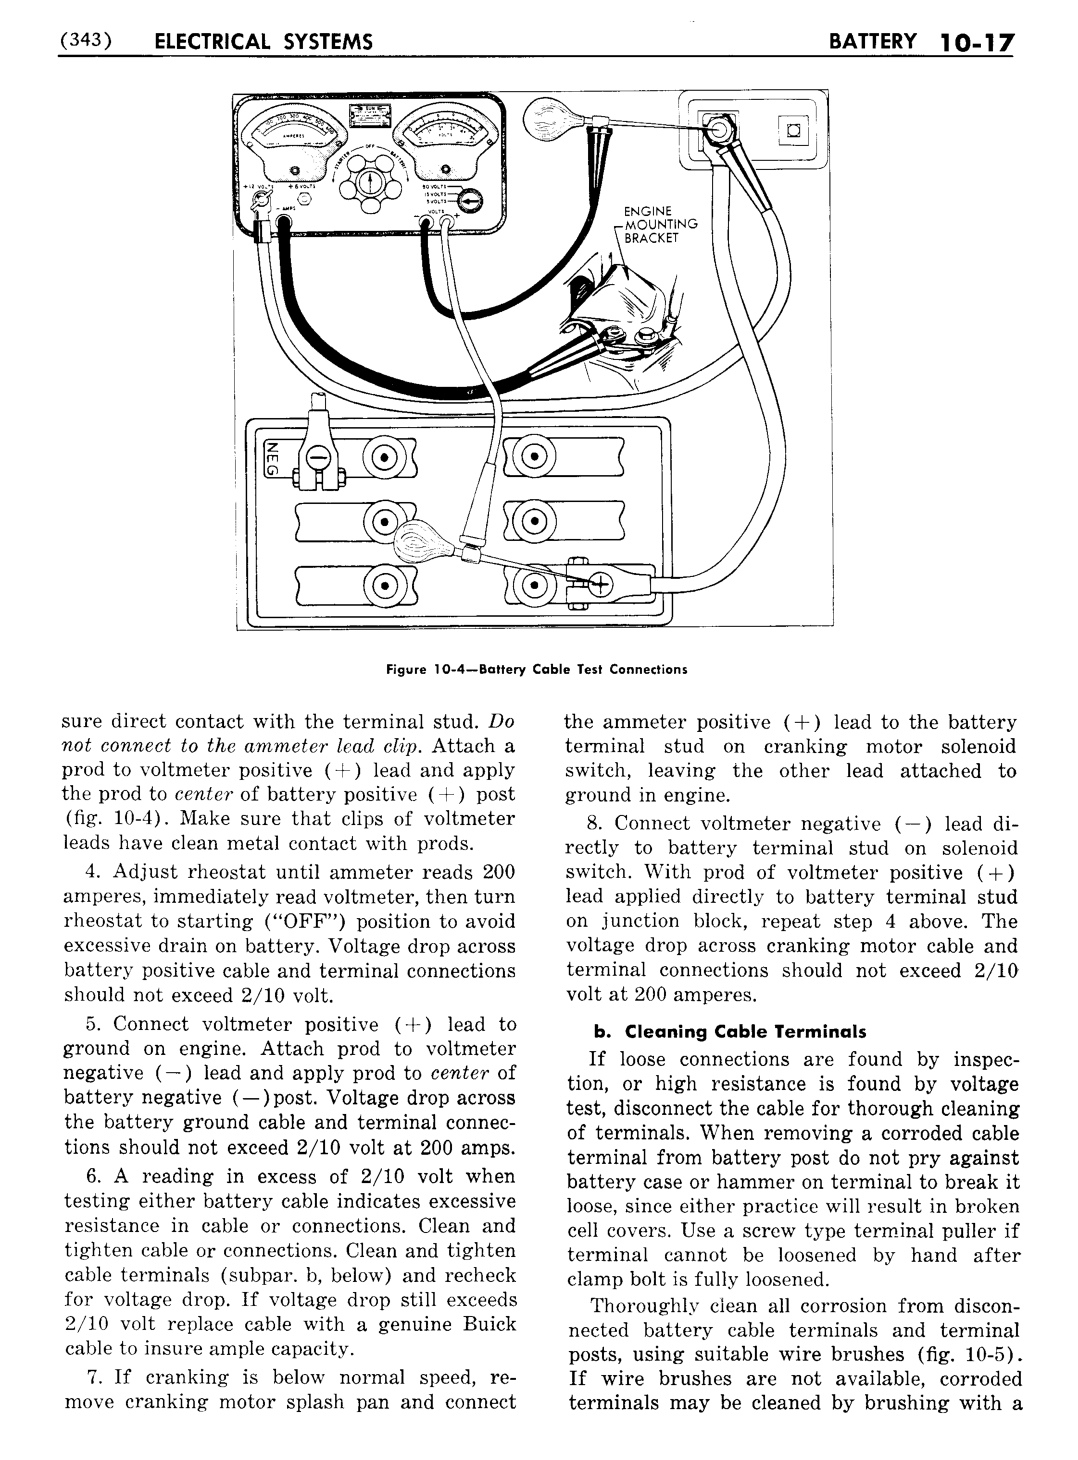 n_11 1956 Buick Shop Manual - Electrical Systems-017-017.jpg